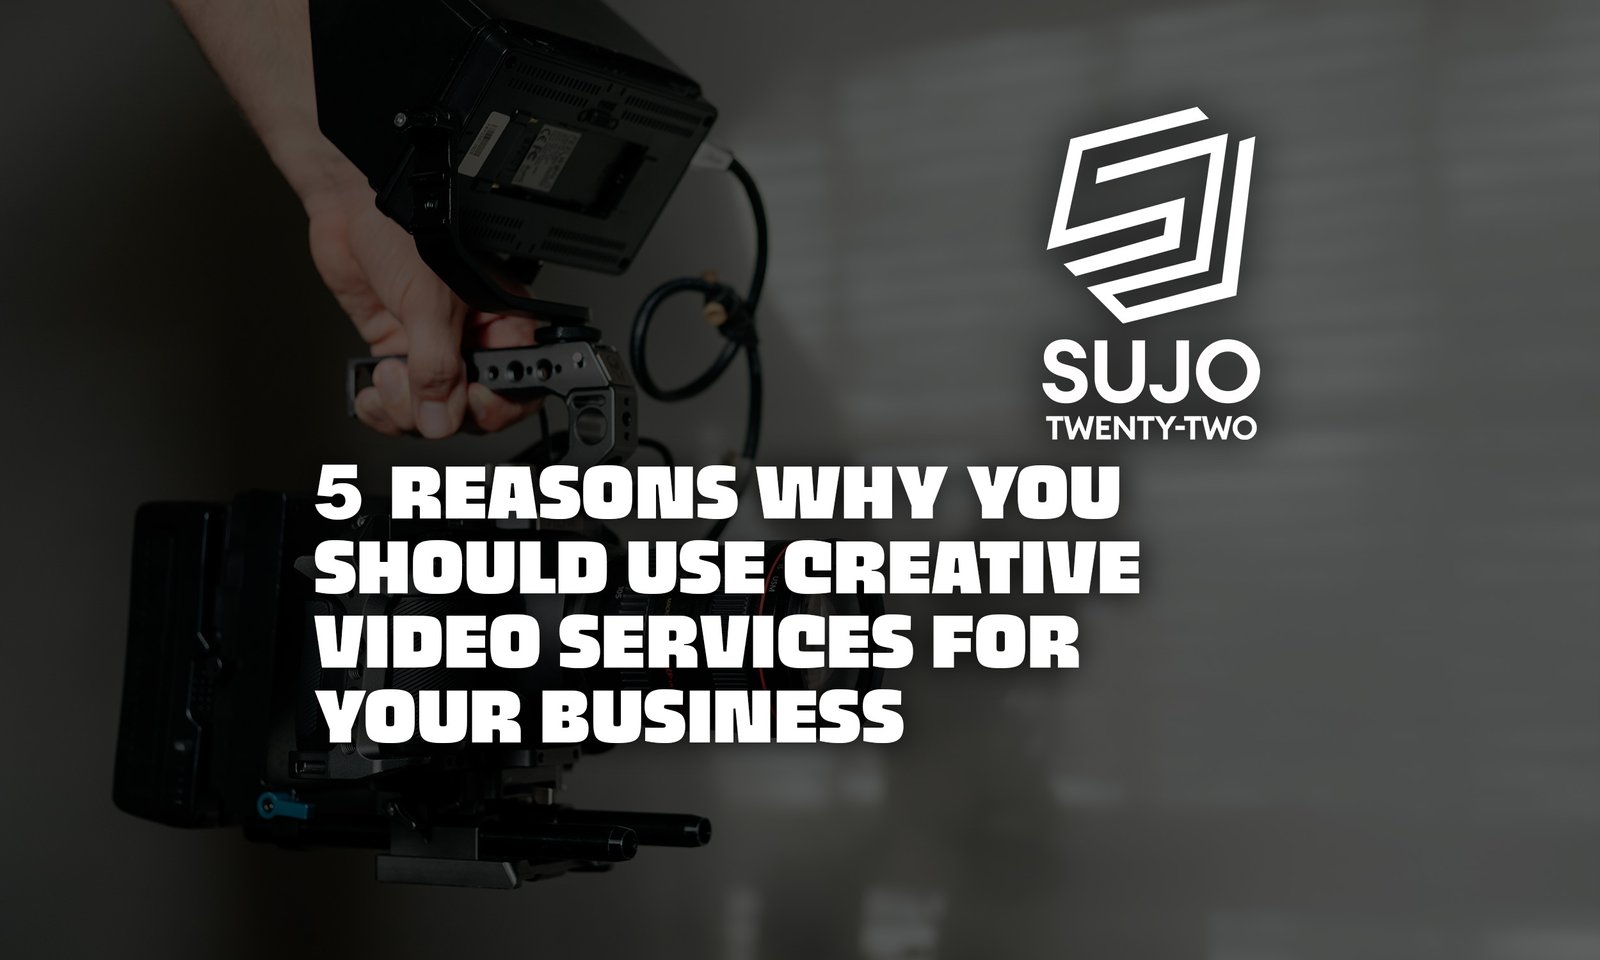 5 Reasons Why You Should Use Creative Video Services For Your Business | SUJO TWENTY-TWO